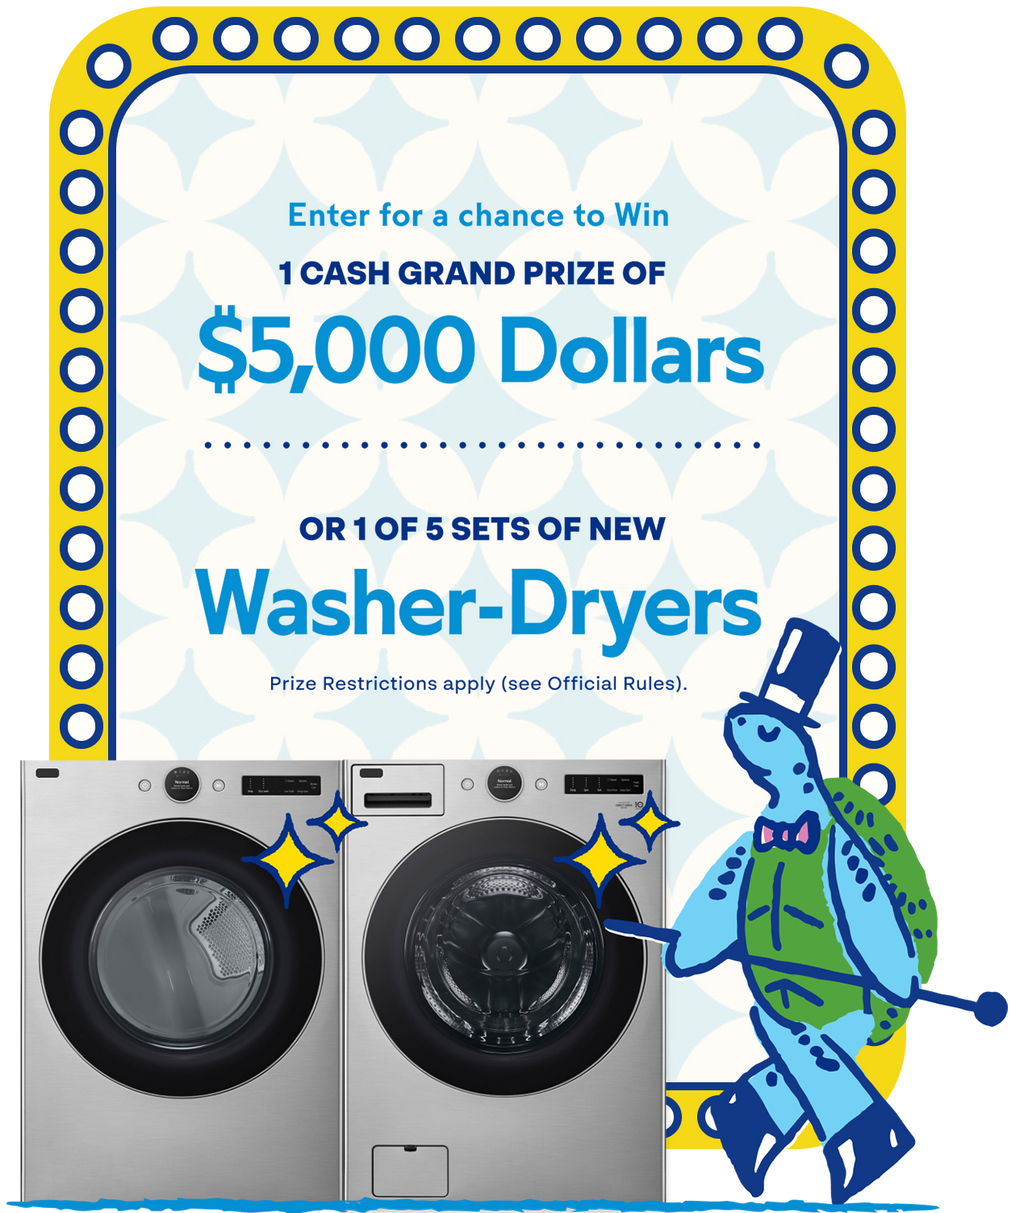 win 1 cash grand price of $5000 dollars or 1 of 5 sets of Washer Dryers